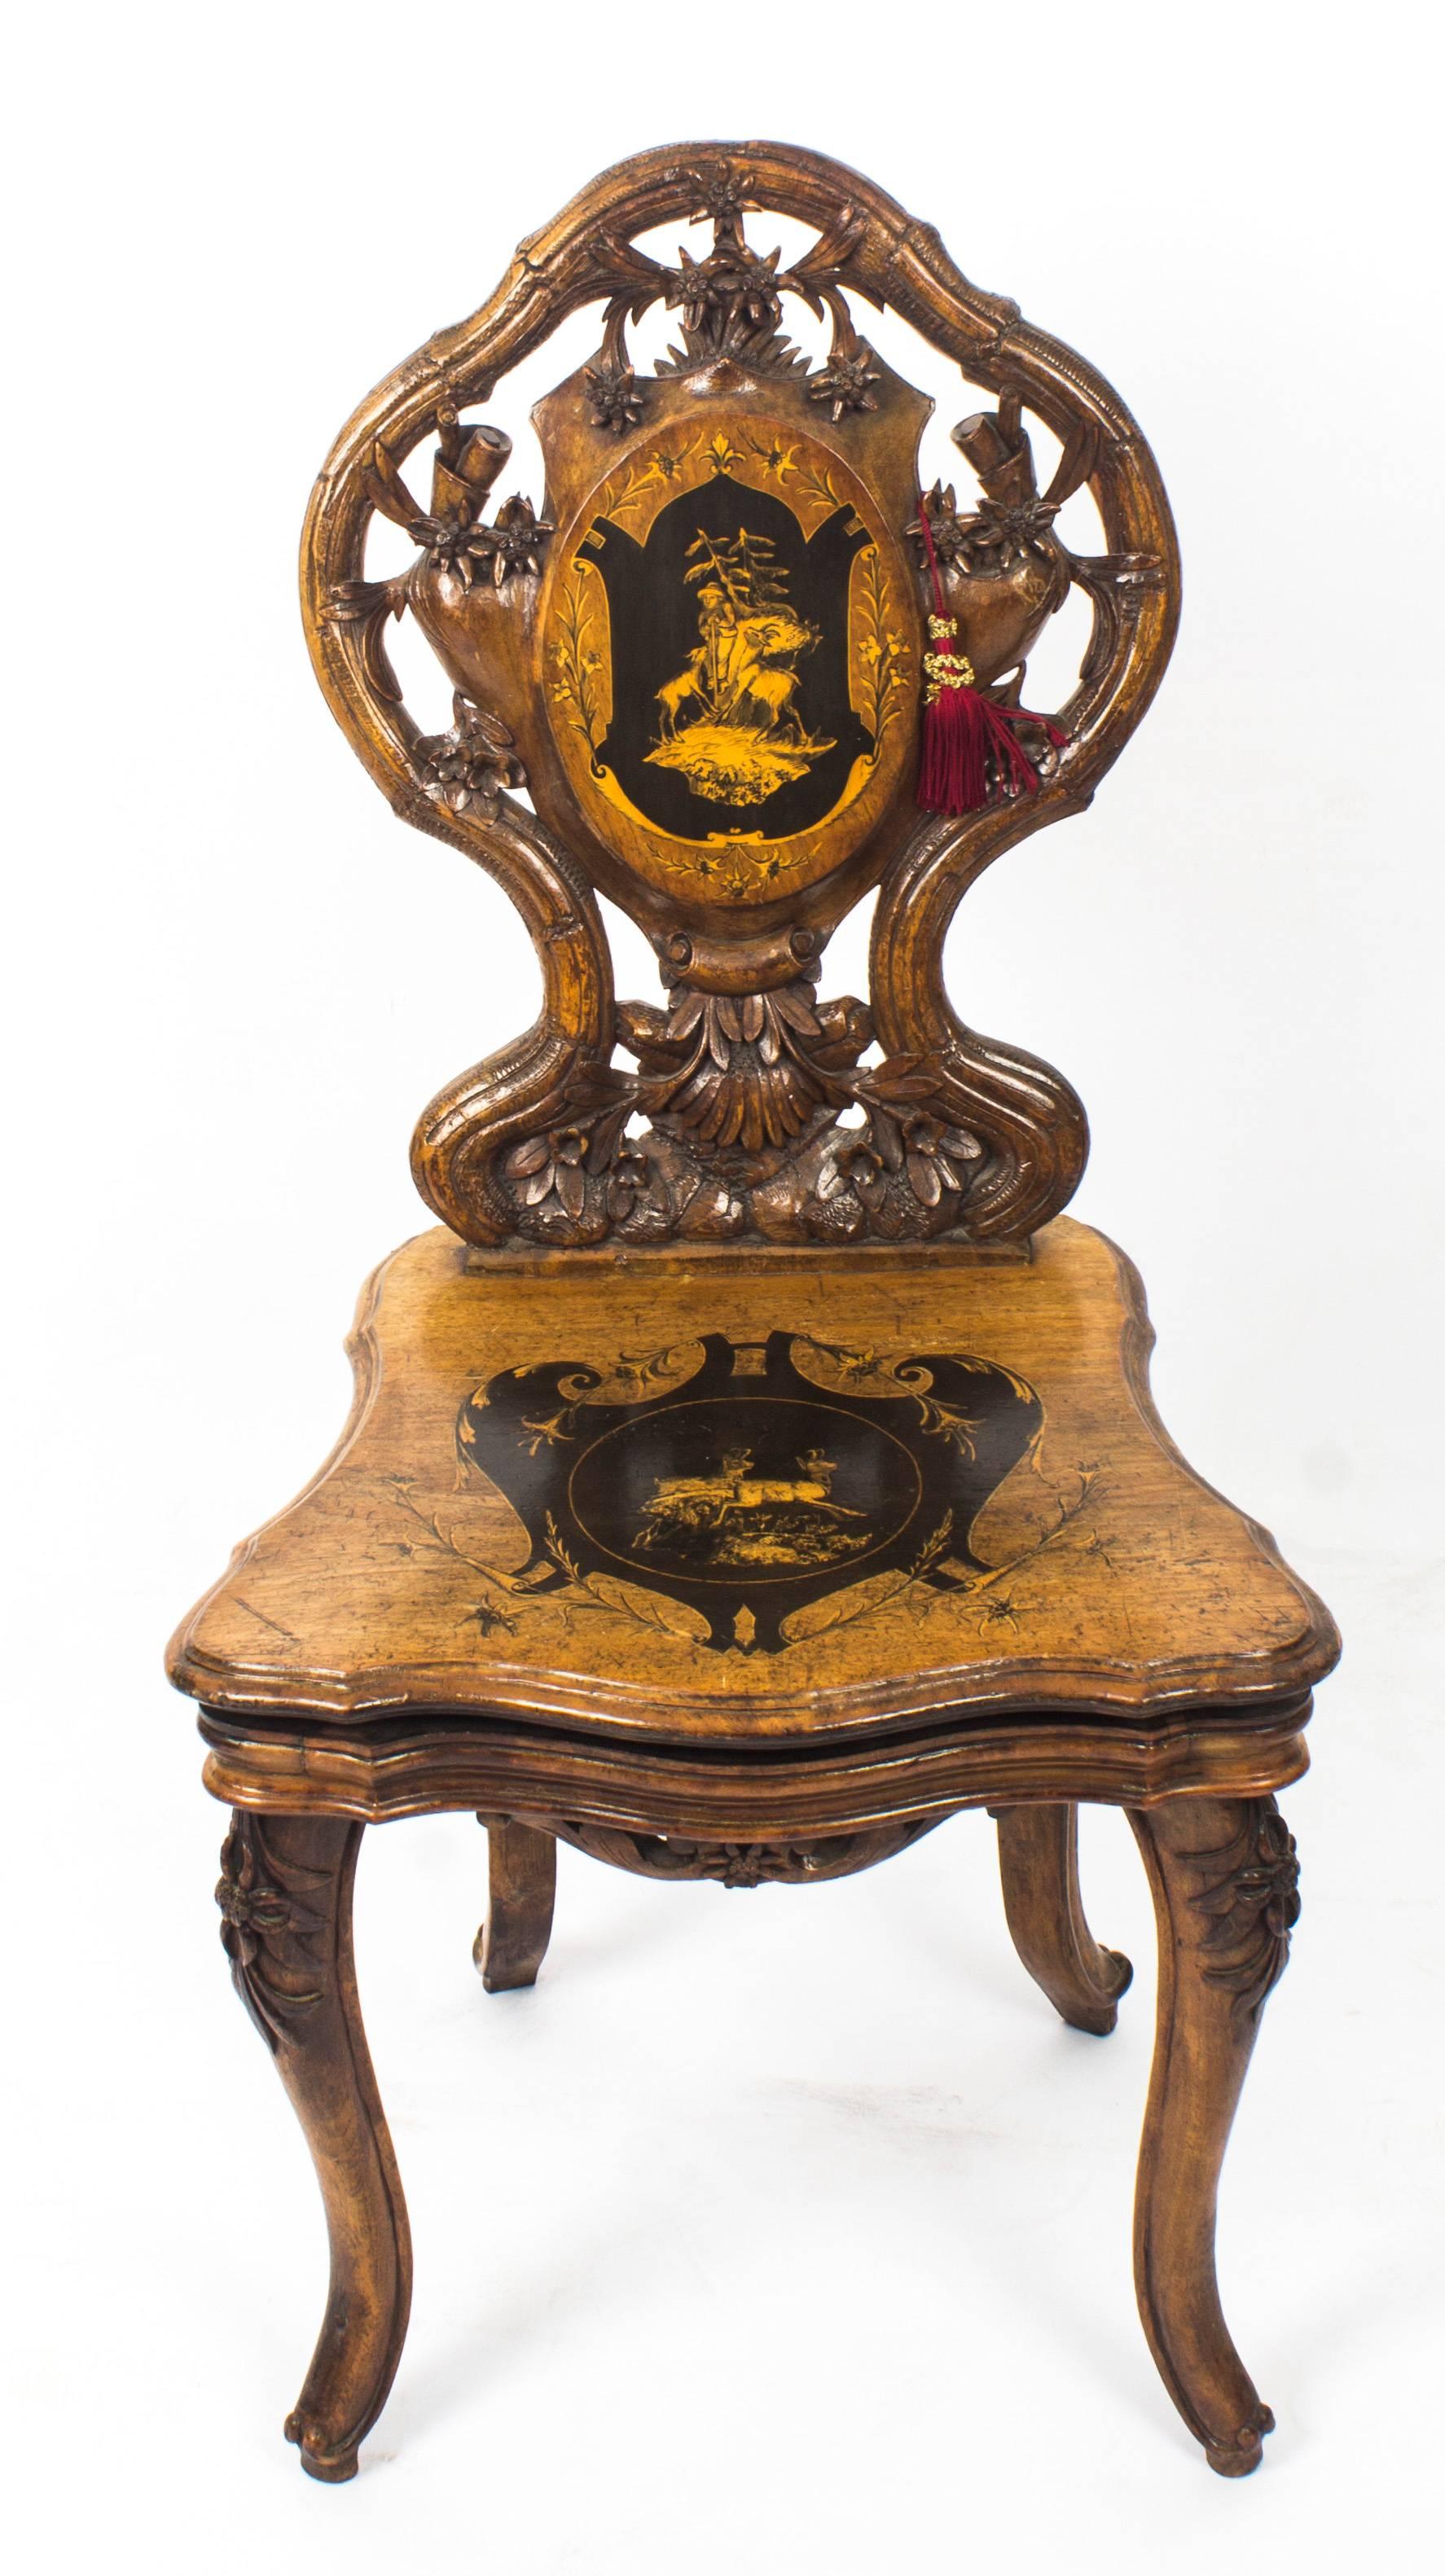 This is a superb antique 19th century Swiss carved walnut and marquetry inlaid musical chair.

It has a striking branch and leaf patterned back which is centred by a cartouche decorated with a figure and two goats, the hinged seat also decorated